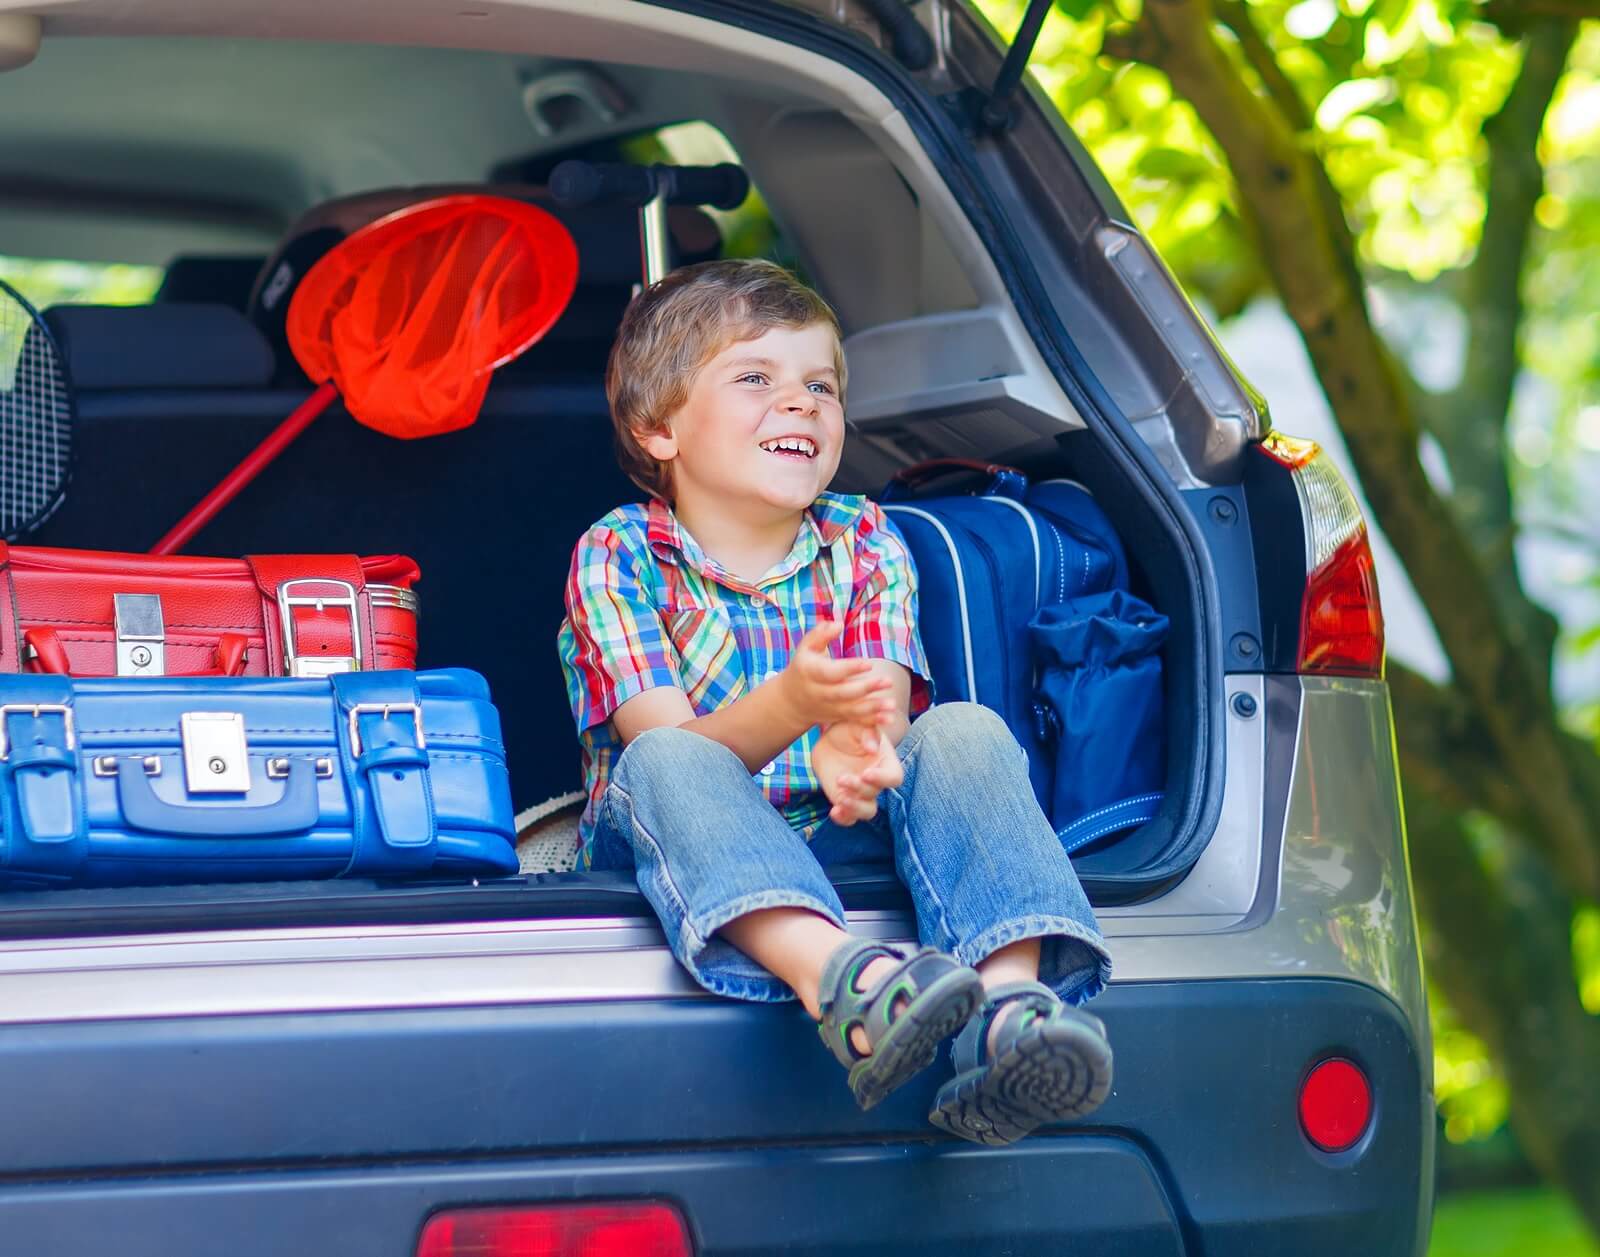 A child sitting in the back of end of a car while packing to go camping.